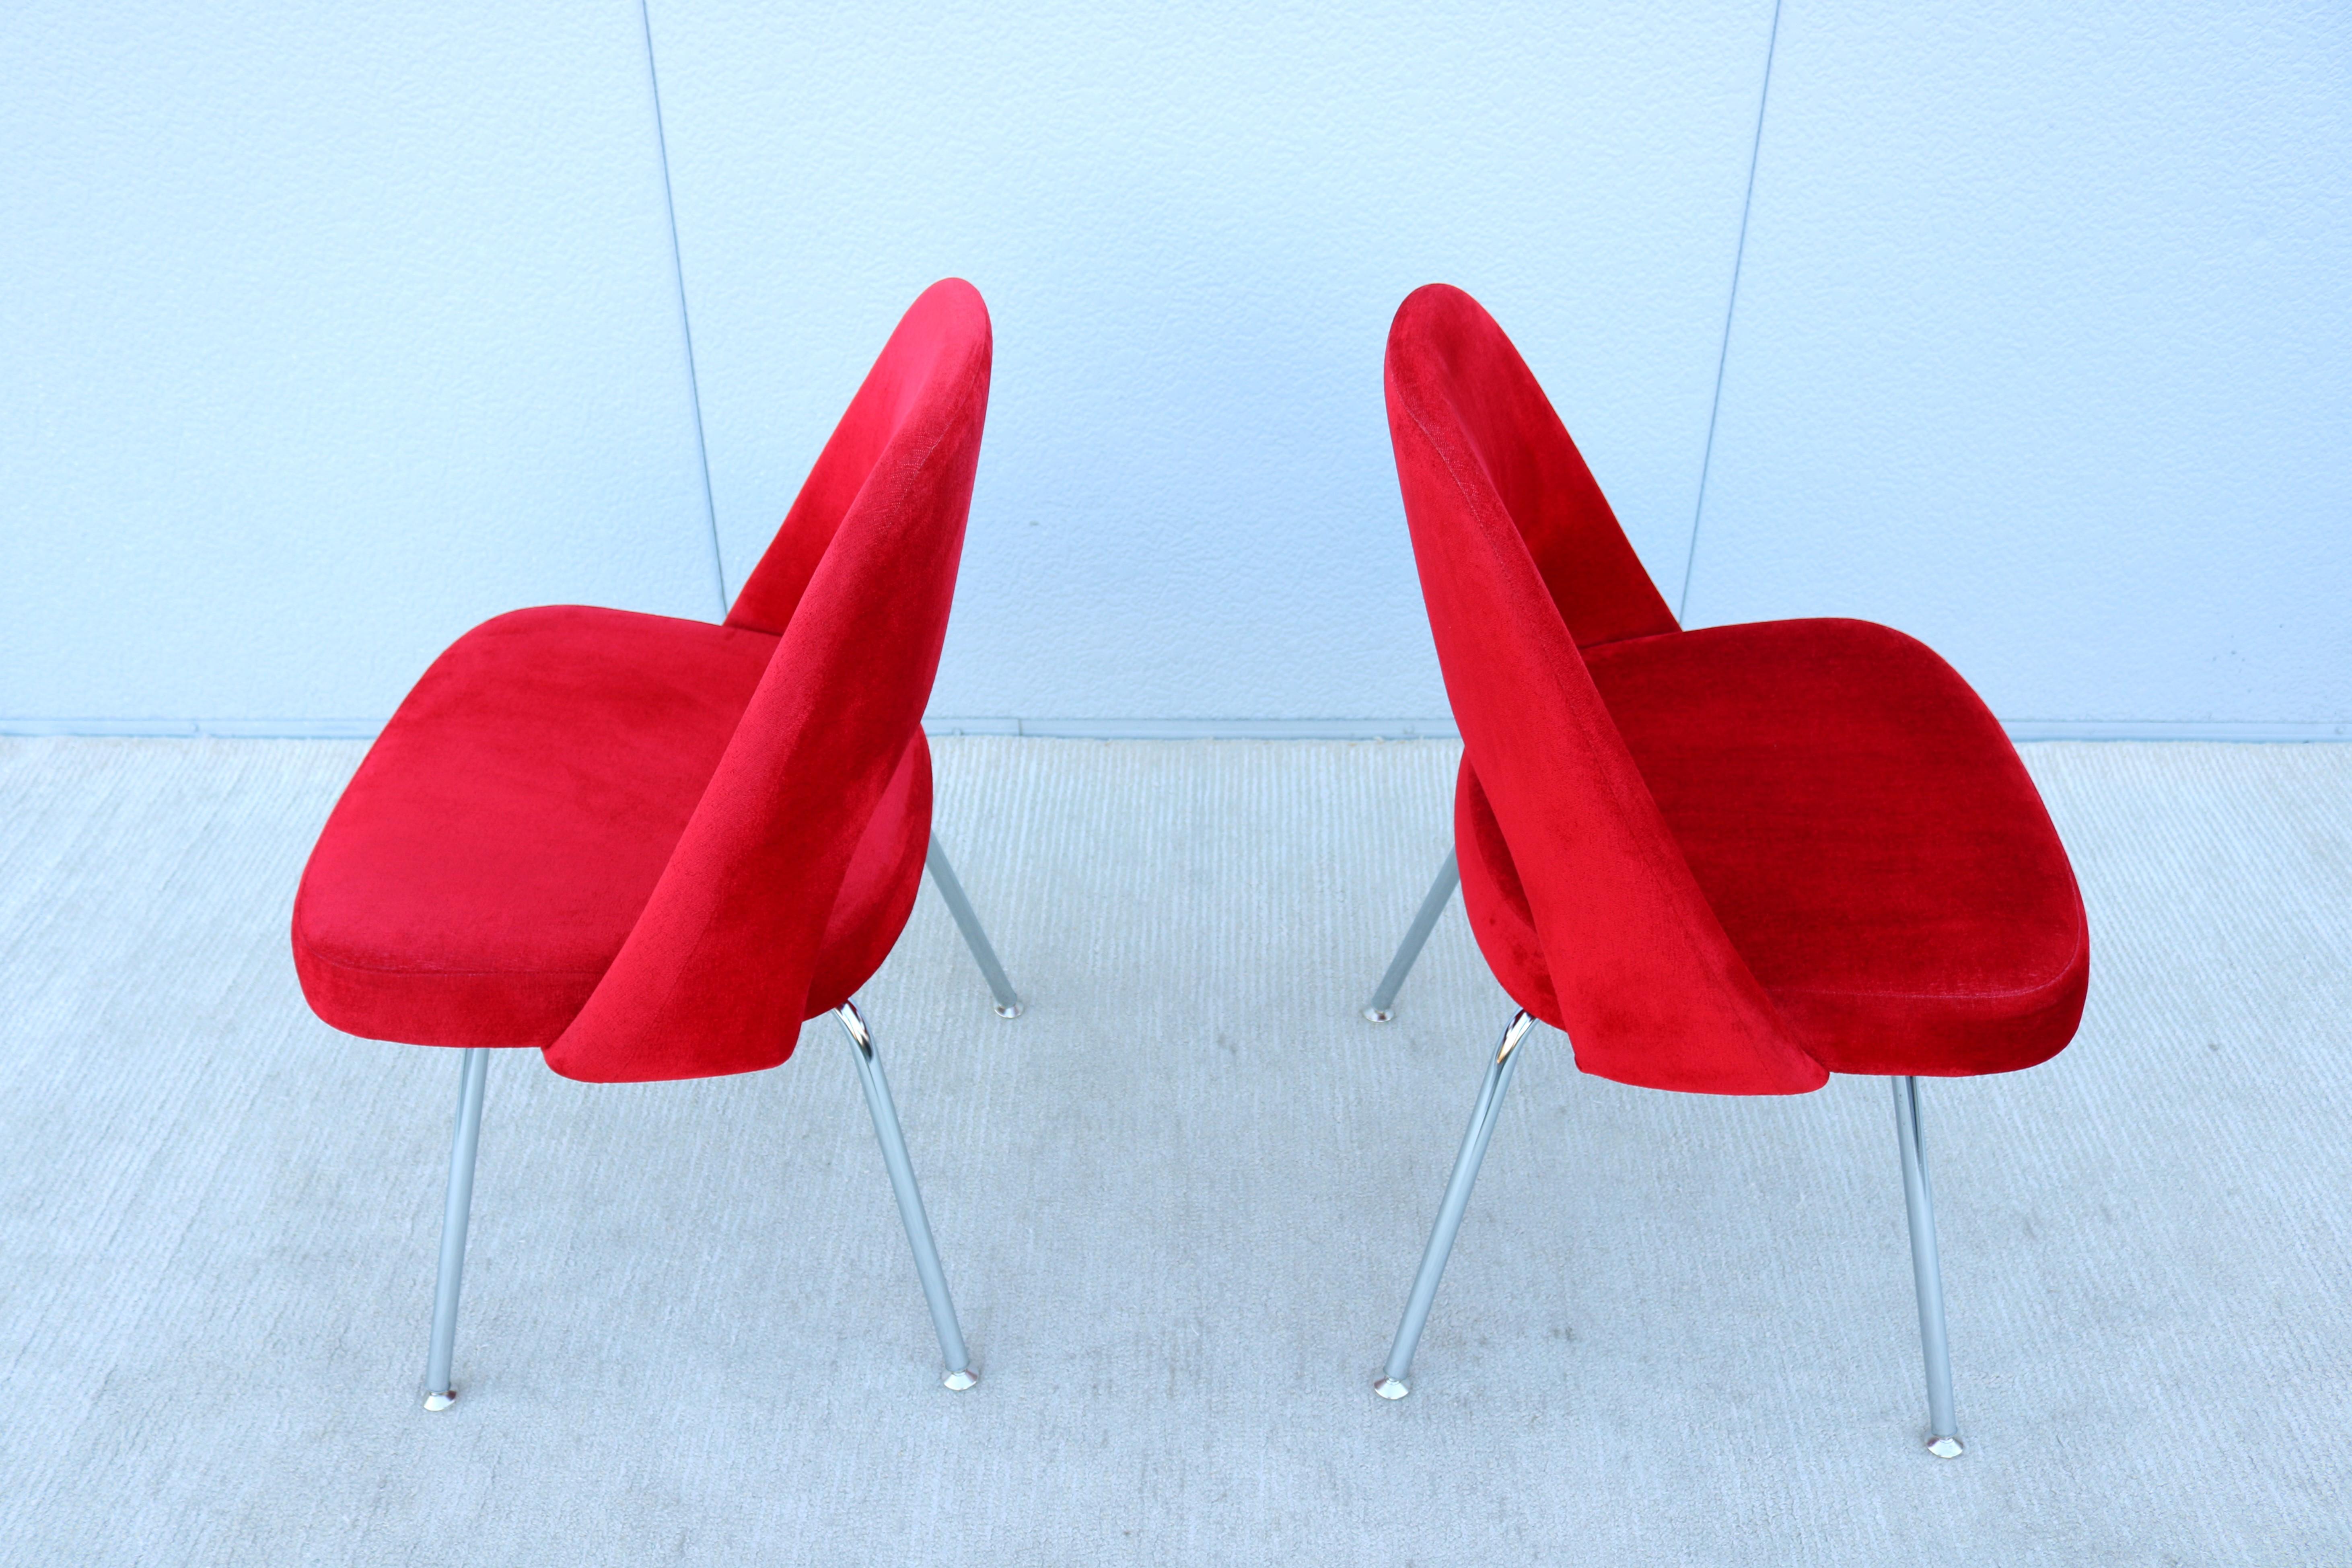 Mid-Century Modern Eero Saarinen for Knoll Red Executive Armless Chairs - a Pair For Sale 2